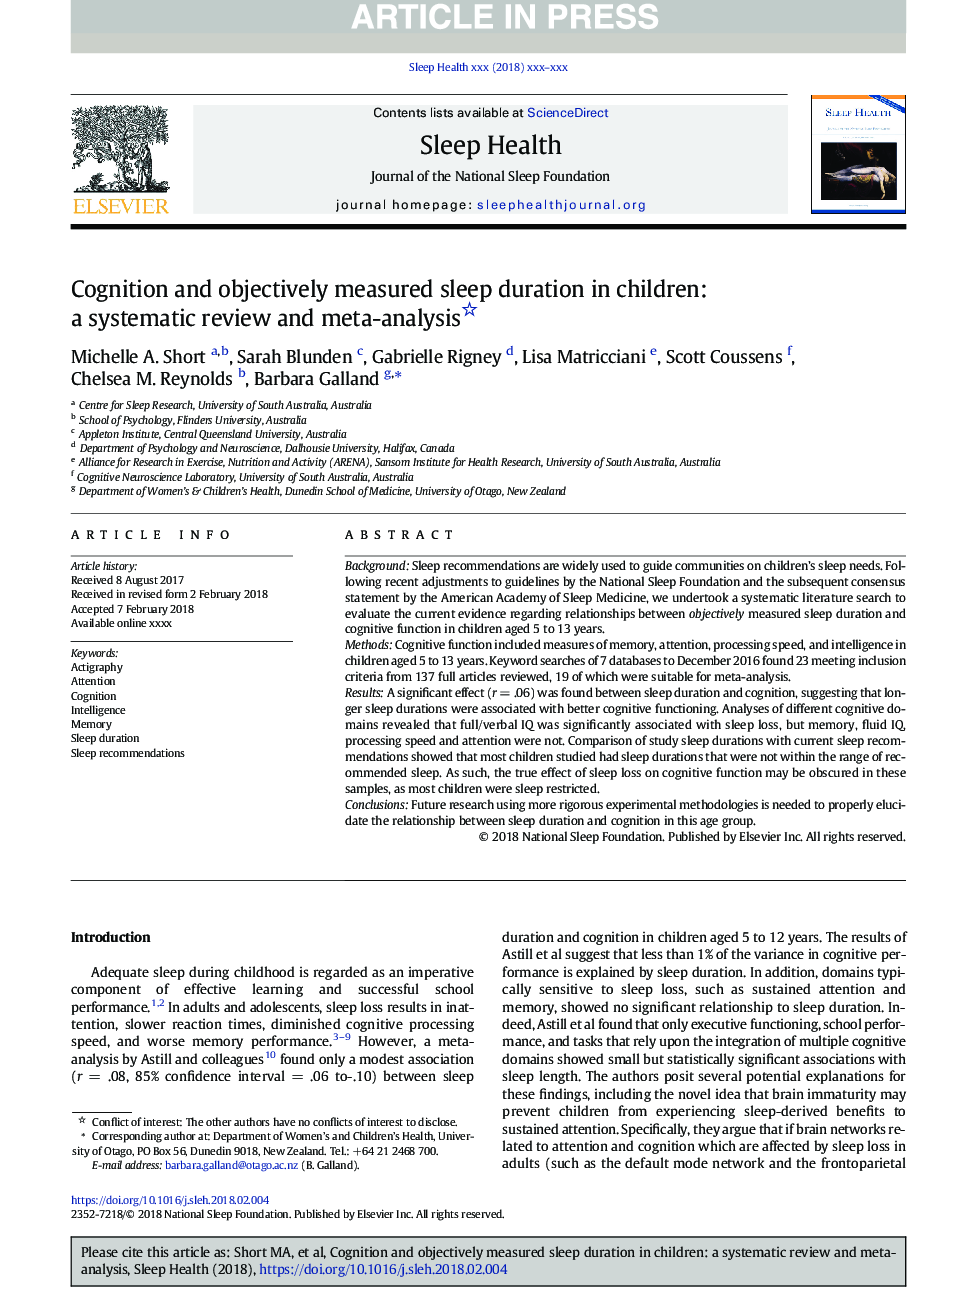 Cognition and objectively measured sleep duration in children: a systematic review and meta-analysis